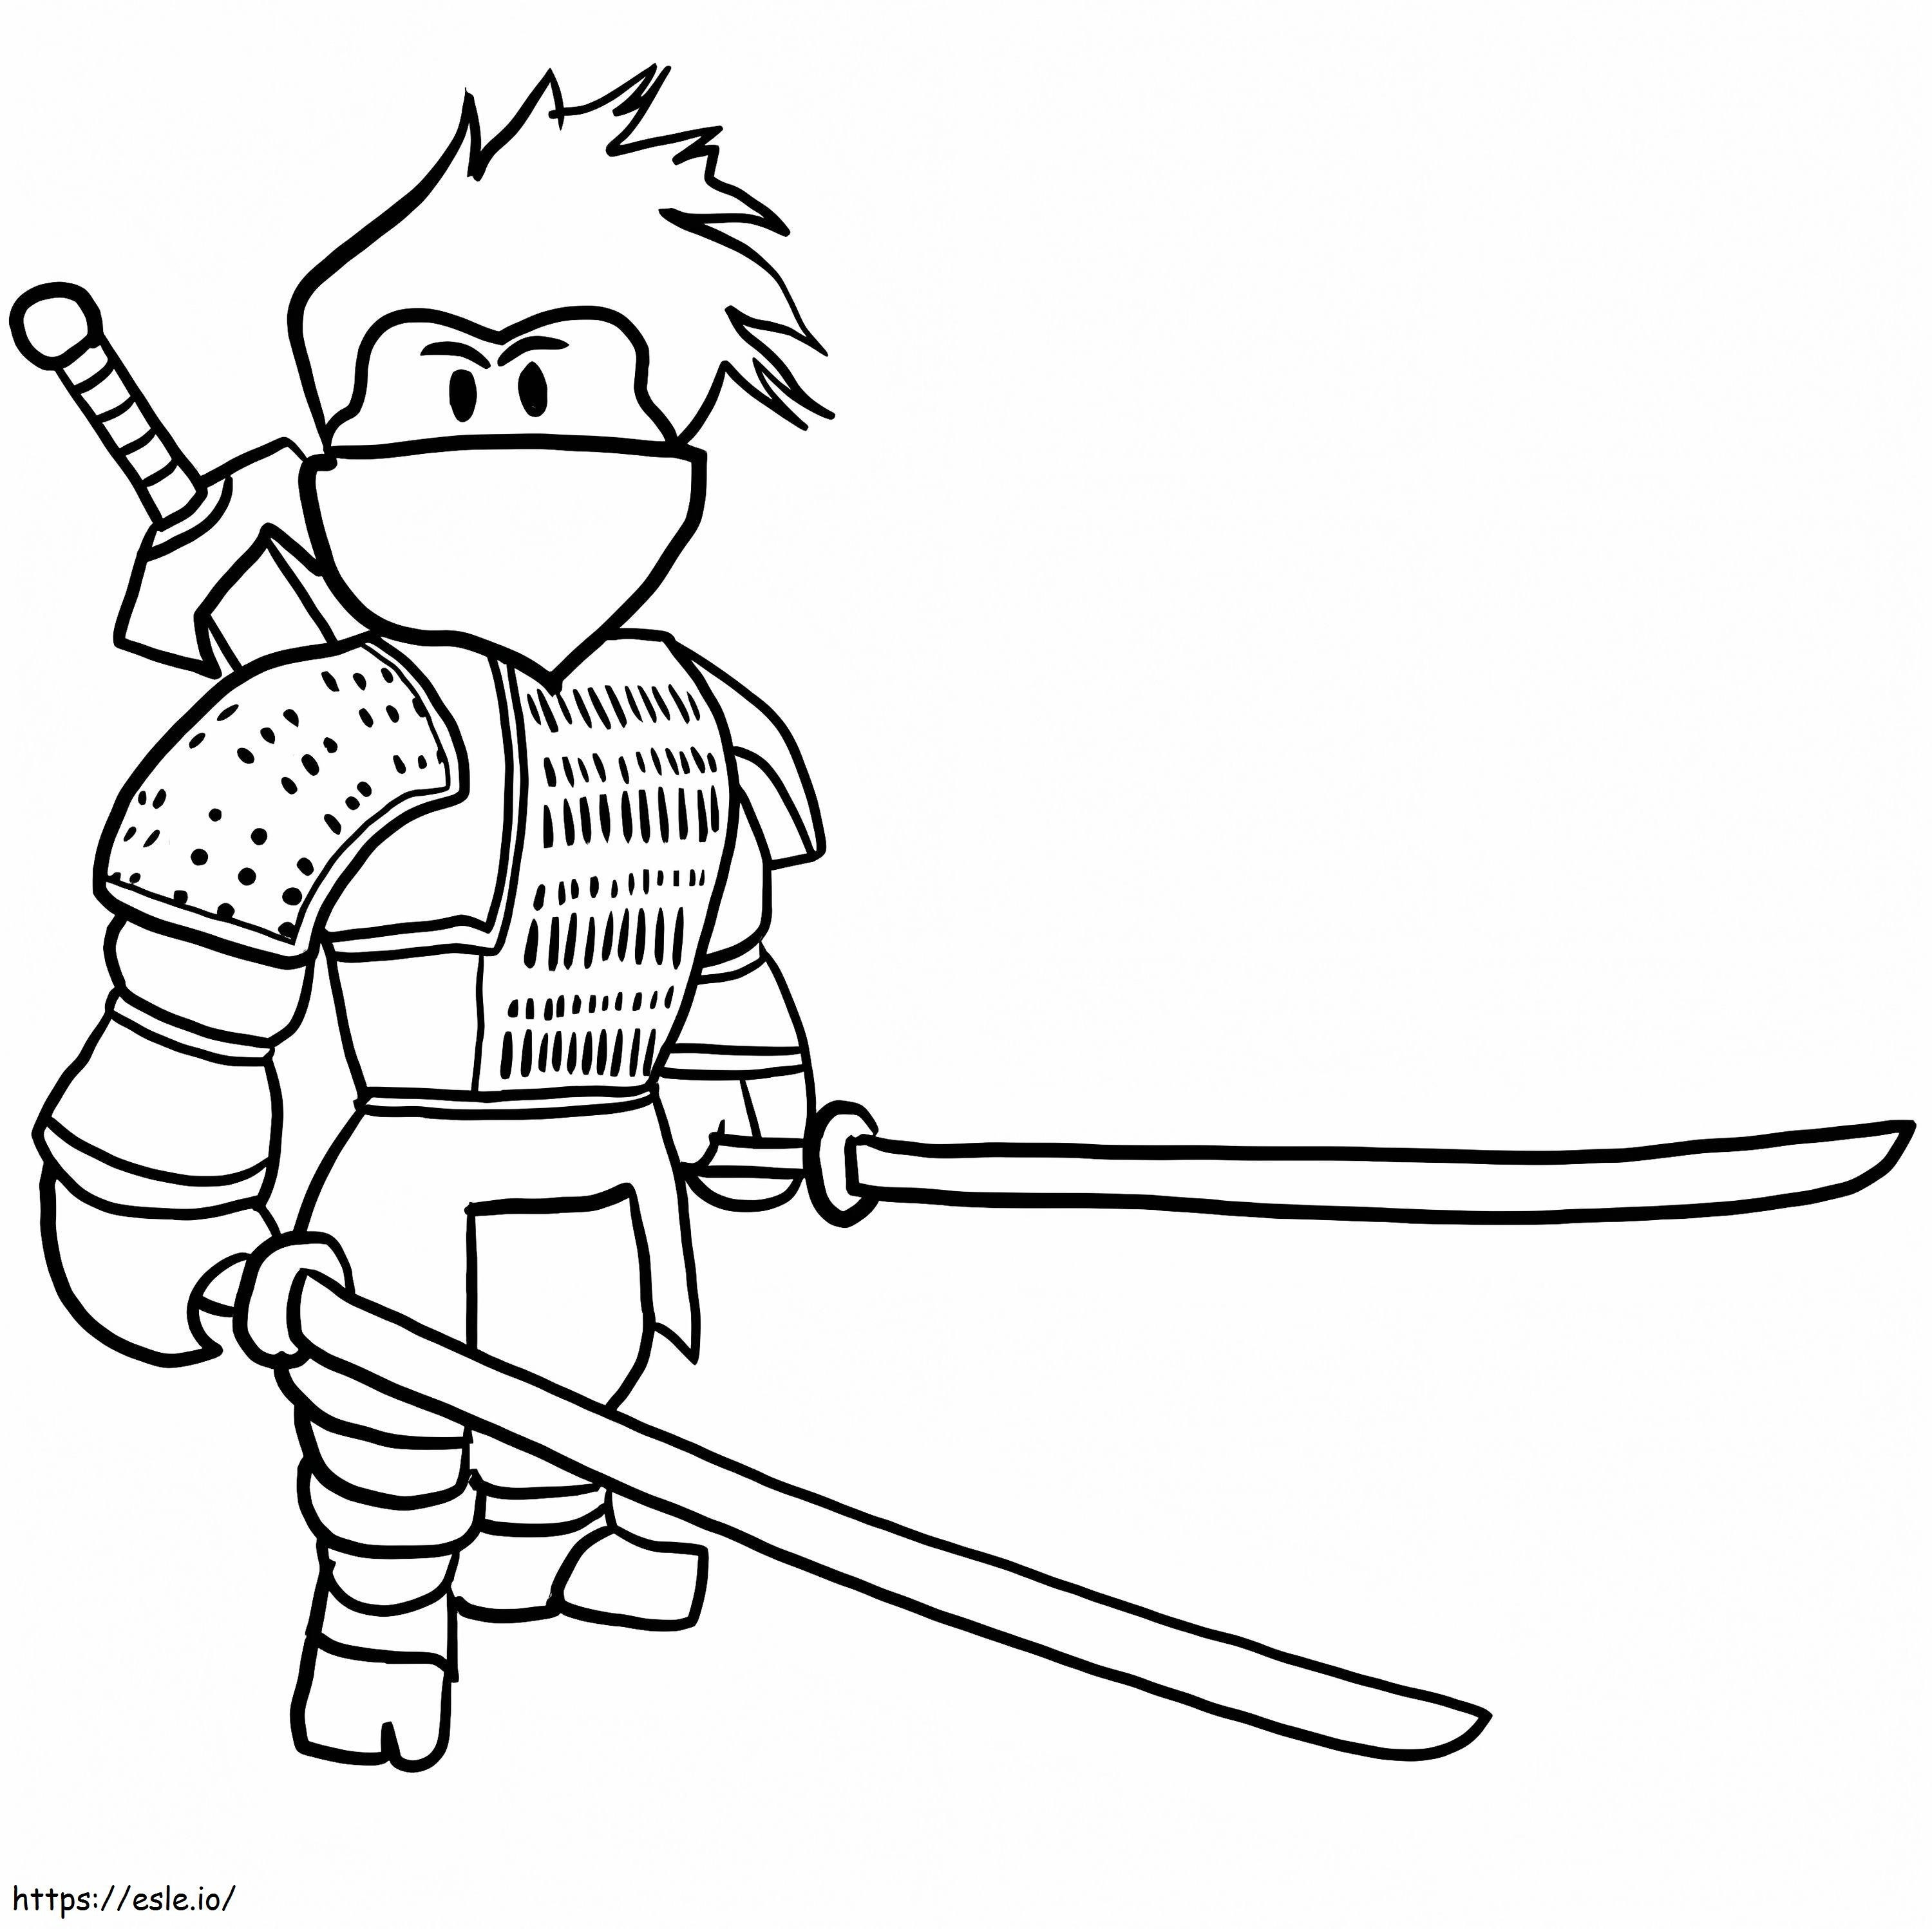 Roblox Ninja With Two Swords coloring page